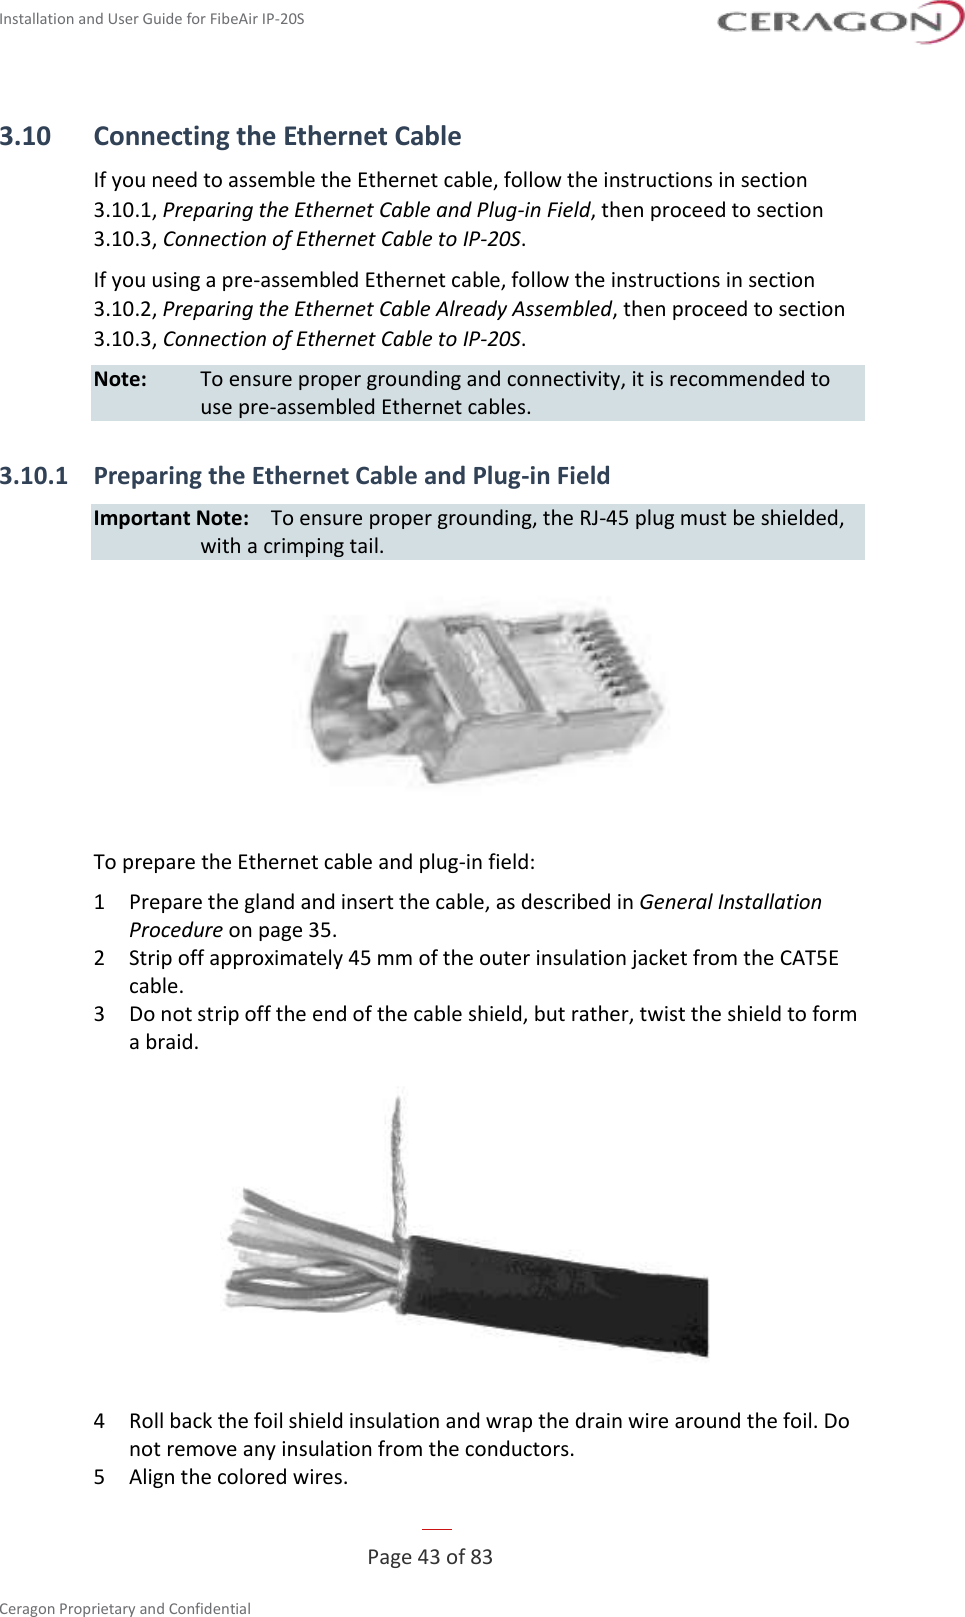 Installation and User Guide for FibeAir IP-20S   Page 43 of 83  Ceragon Proprietary and Confidential     3.10 Connecting the Ethernet Cable If you need to assemble the Ethernet cable, follow the instructions in section 3.10.1, Preparing the Ethernet Cable and Plug-in Field, then proceed to section 3.10.3, Connection of Ethernet Cable to IP-20S. If you using a pre-assembled Ethernet cable, follow the instructions in section 3.10.2, Preparing the Ethernet Cable Already Assembled, then proceed to section 3.10.3, Connection of Ethernet Cable to IP-20S. Note:  To ensure proper grounding and connectivity, it is recommended to use pre-assembled Ethernet cables. 3.10.1 Preparing the Ethernet Cable and Plug-in Field Important Note:  To ensure proper grounding, the RJ-45 plug must be shielded, with a crimping tail.  To prepare the Ethernet cable and plug-in field: 1  Prepare the gland and insert the cable, as described in General Installation Procedure on page 35. 2  Strip off approximately 45 mm of the outer insulation jacket from the CAT5E cable. 3  Do not strip off the end of the cable shield, but rather, twist the shield to form a braid.  4  Roll back the foil shield insulation and wrap the drain wire around the foil. Do not remove any insulation from the conductors. 5  Align the colored wires. 